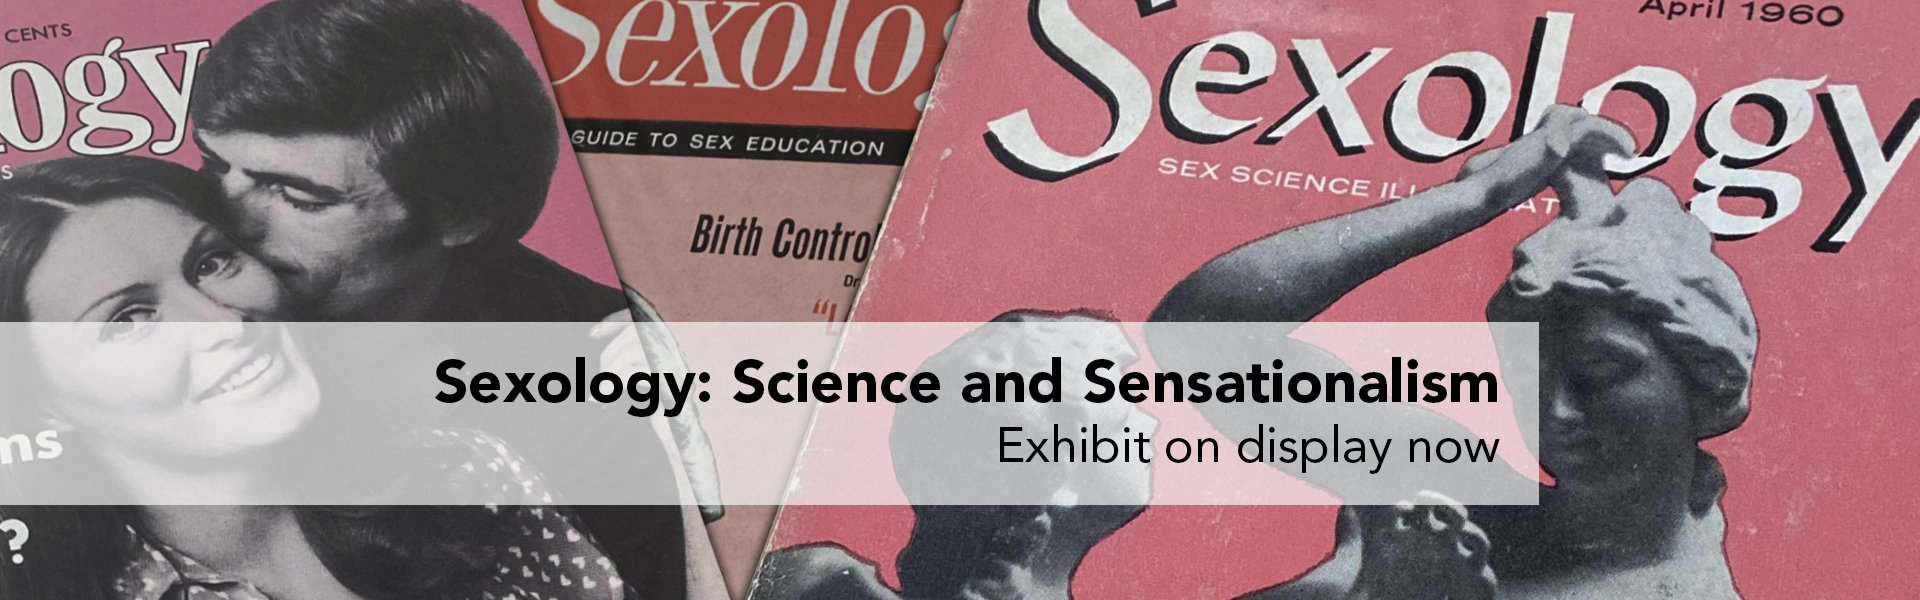 Sexology: Science and Sensational - On display though May 18